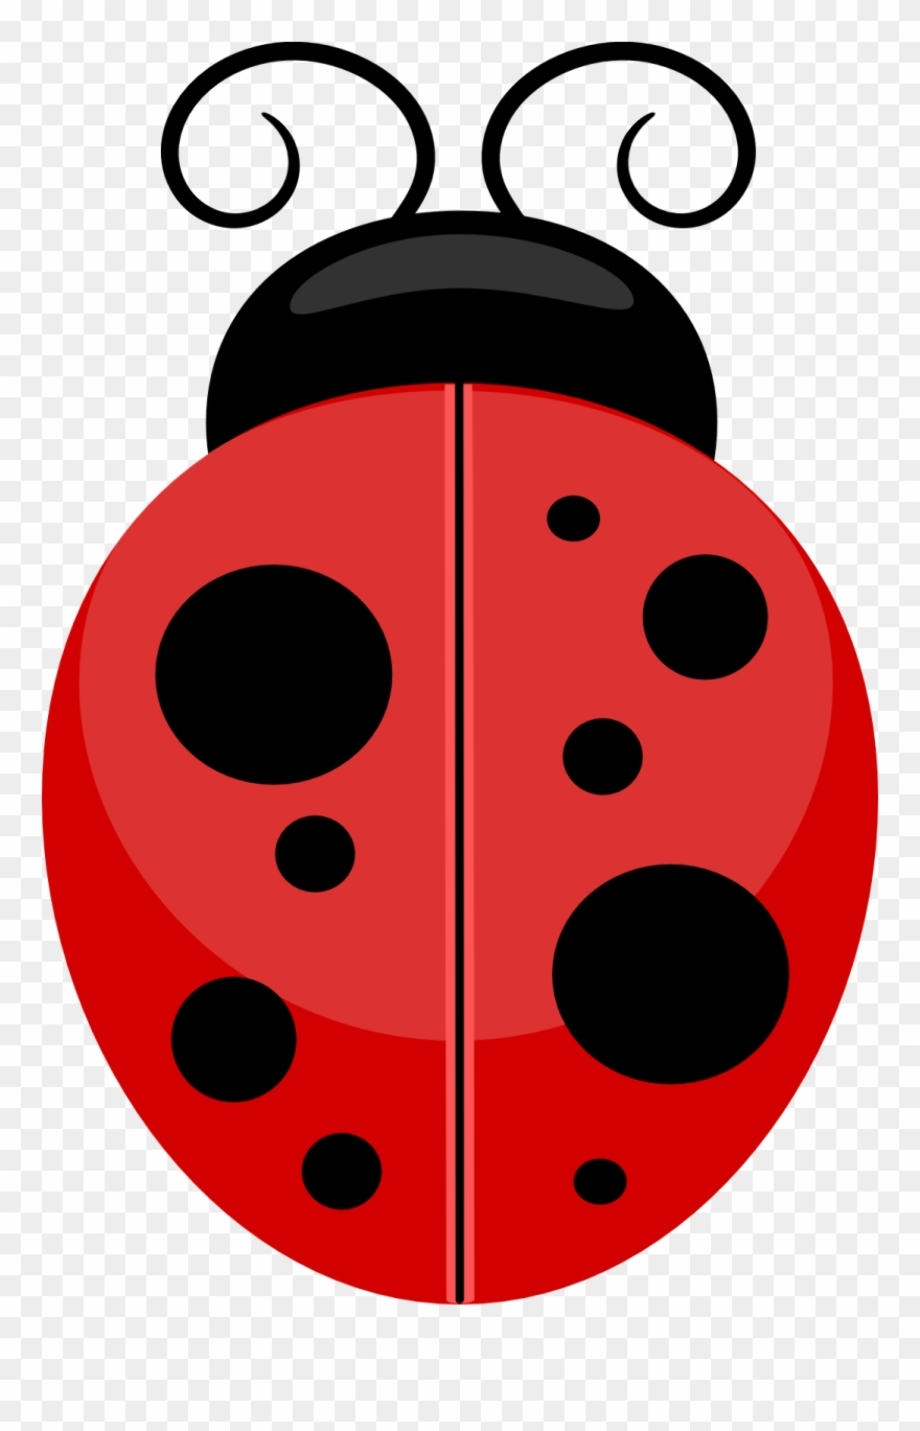 Download High Quality ladybug clipart watercolor Transparent PNG Images